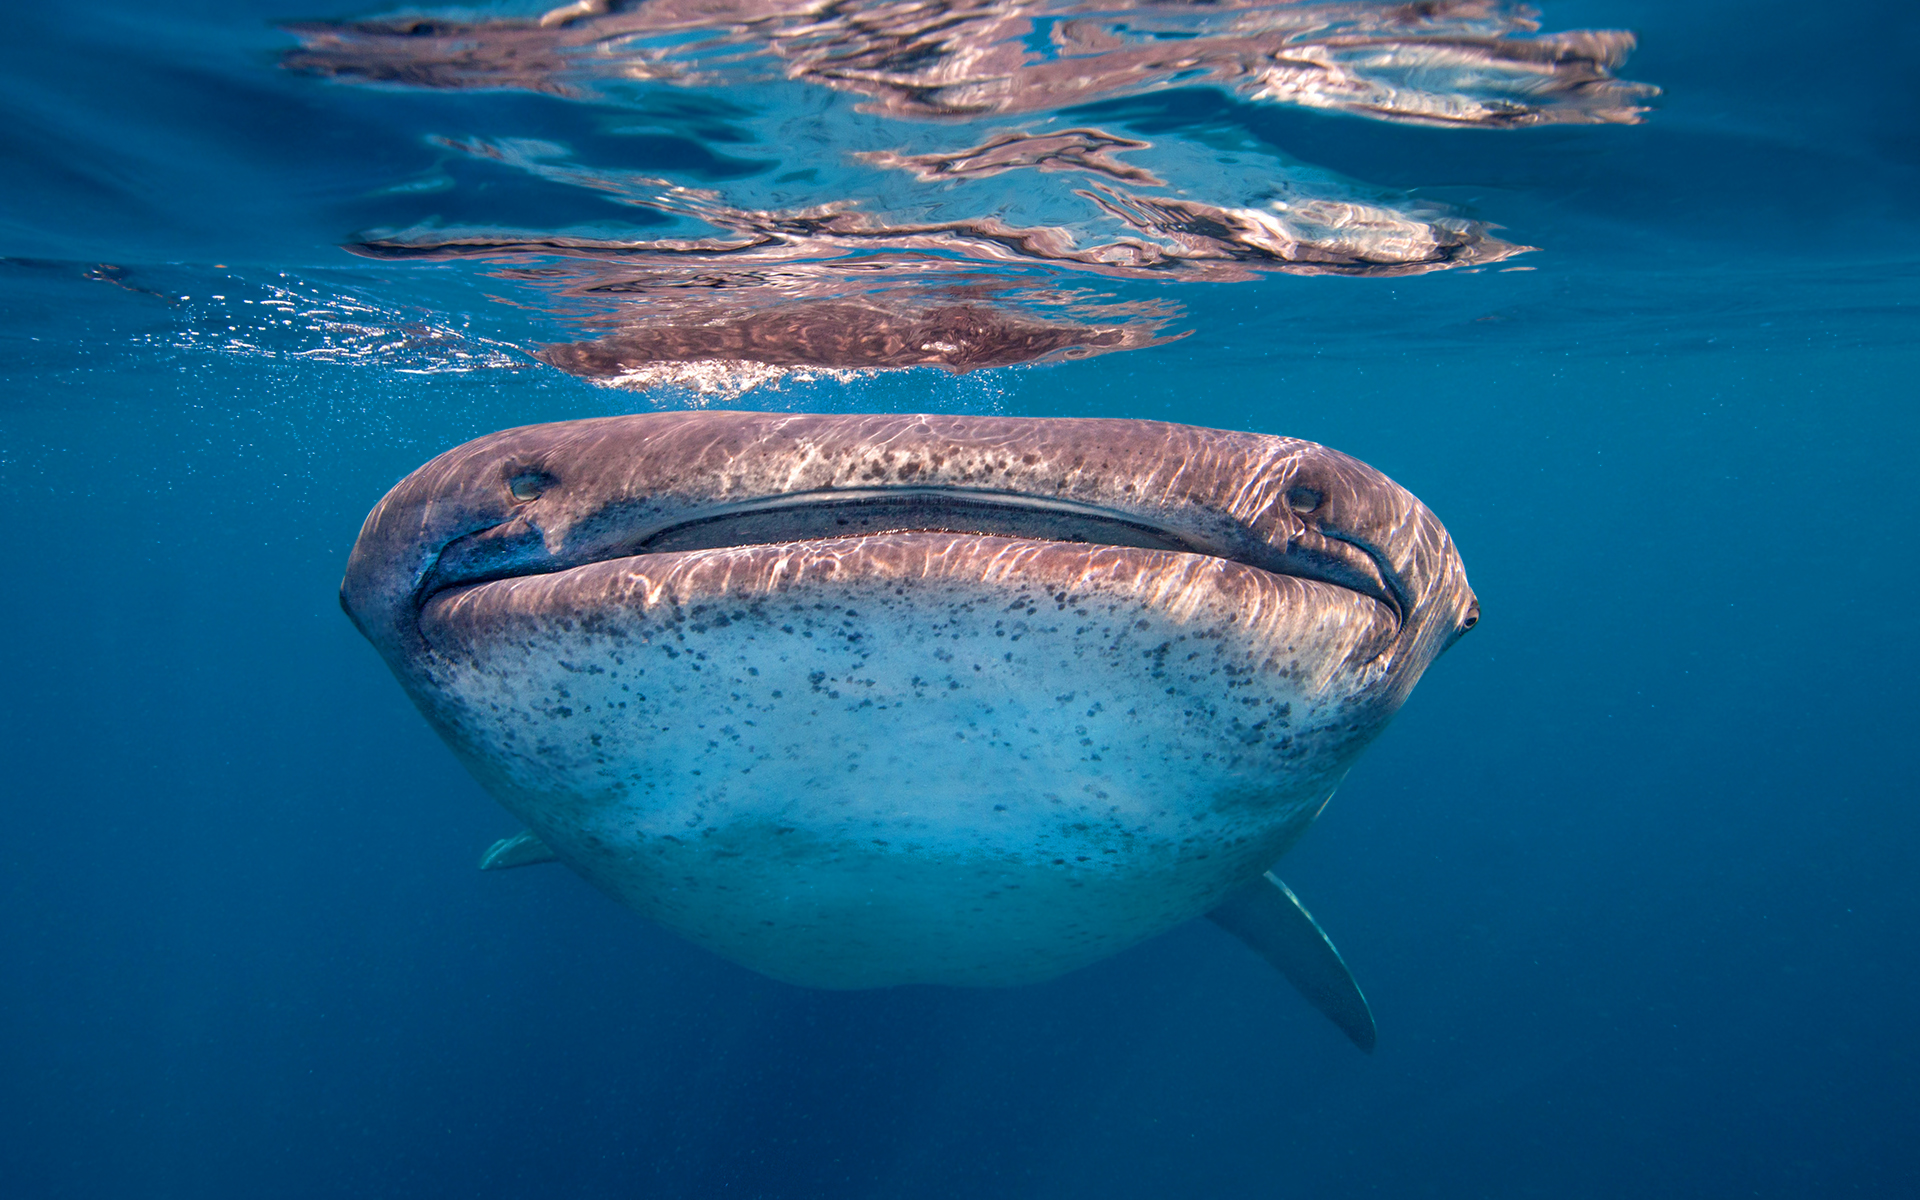 Whale shark watching at you photo and wallpaper. Cute Whale shark